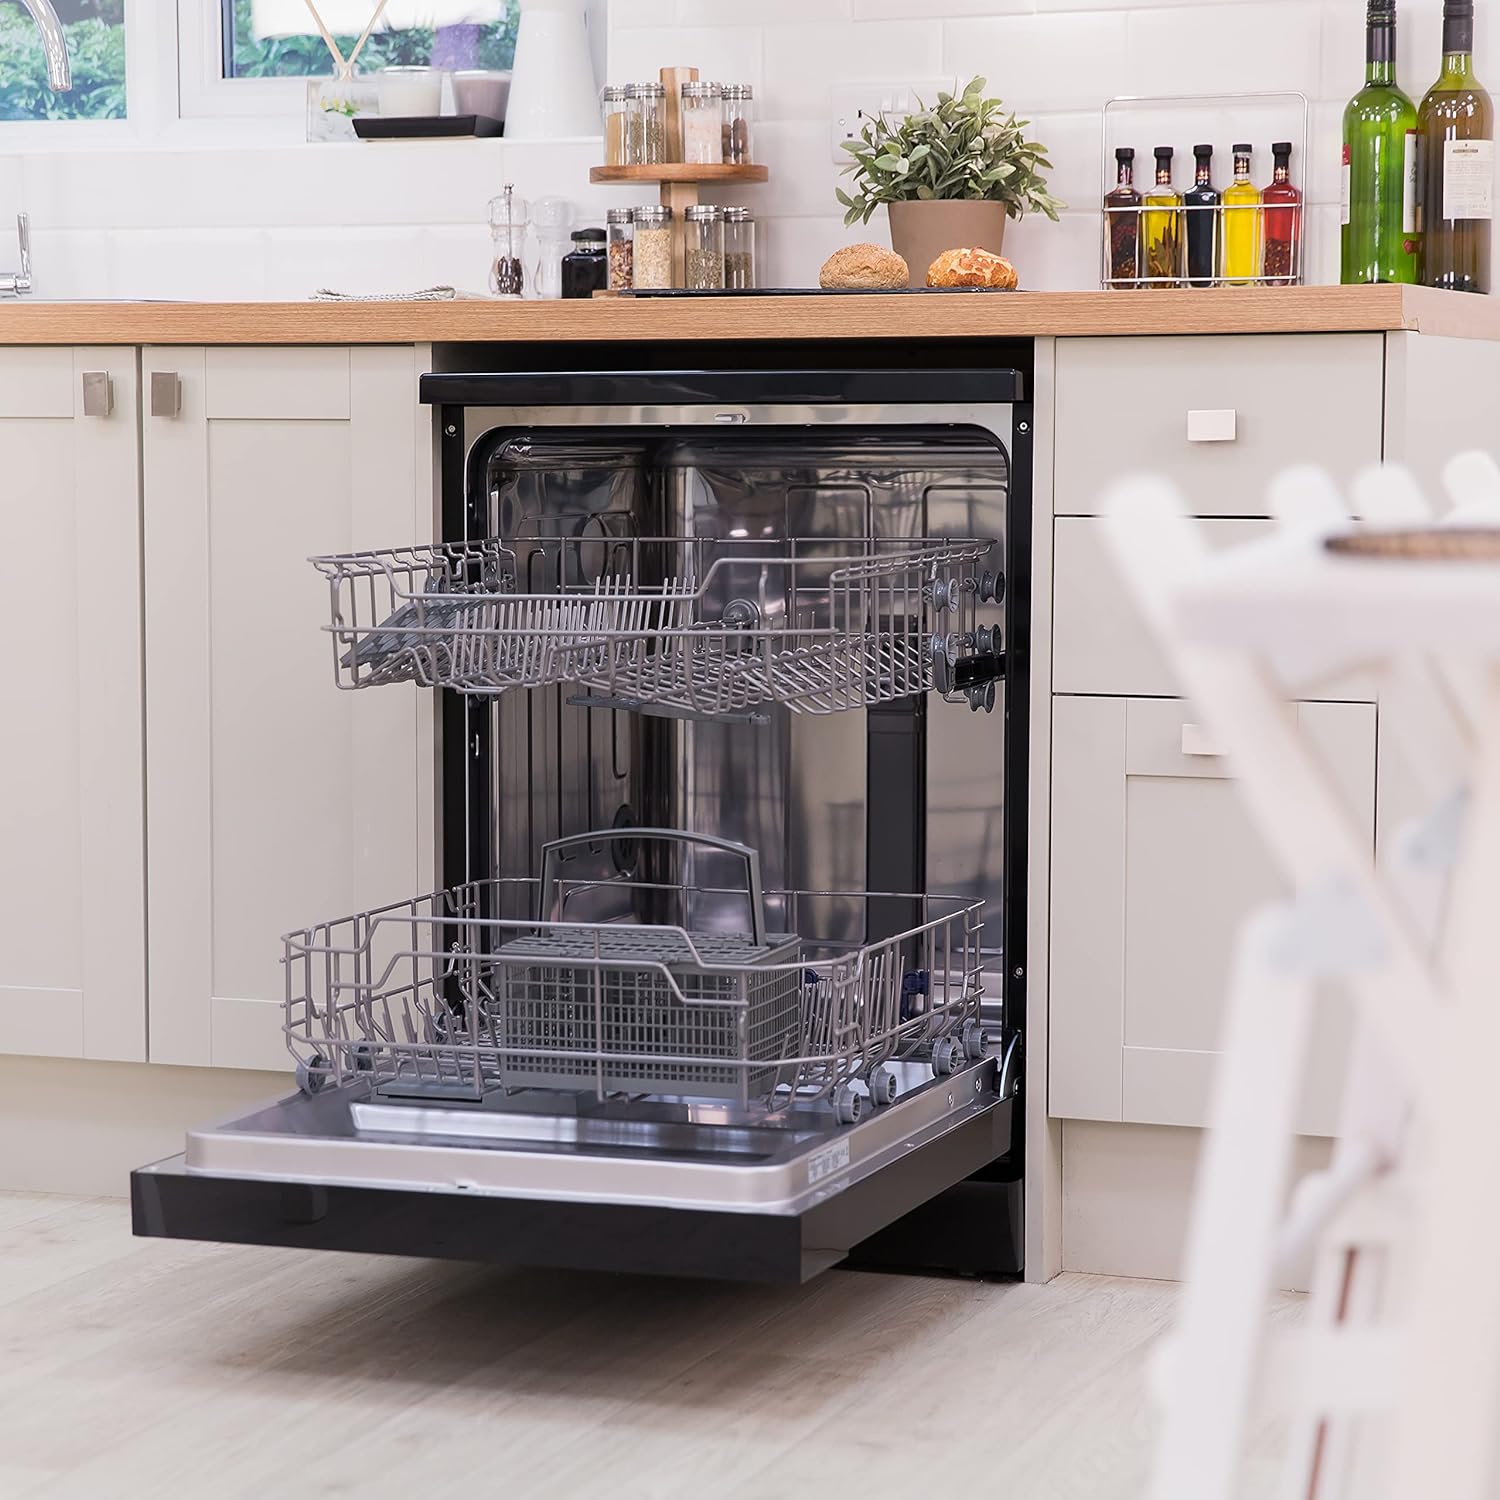 Russell Hobbs RHDW3B - M Freestanding Full Size Dishwasher, 5 Temperature Settings, 11 liters, Black, Noise level: decibels 49 - Amazing Gadgets Outlet